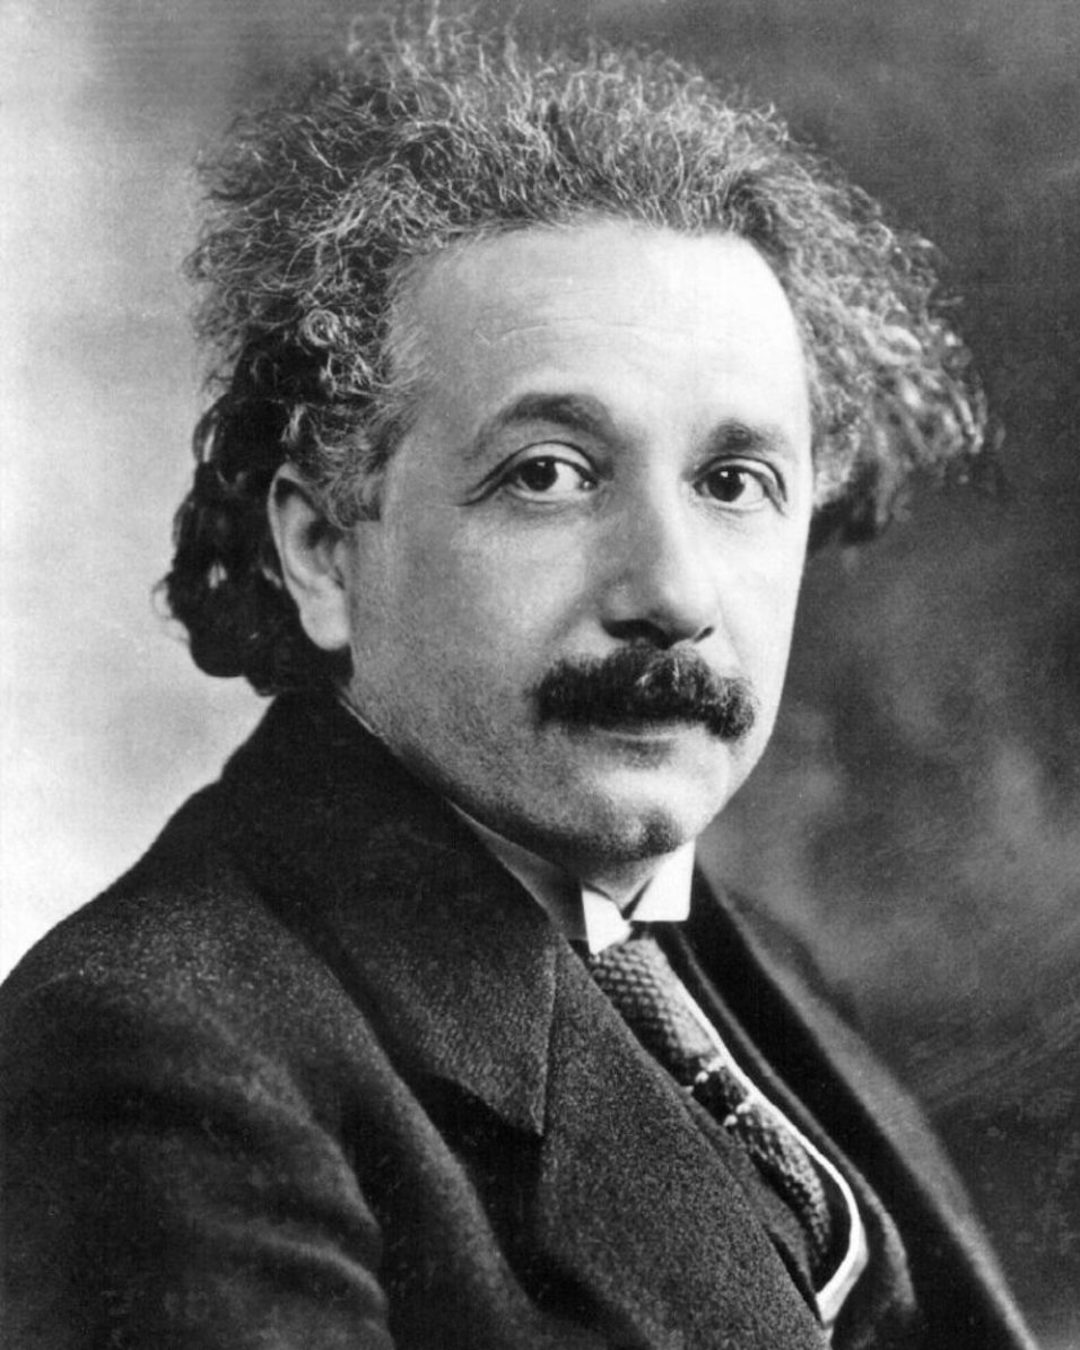 Albert Einstein 1879-1955 - Legendary theoretical physicist, developed the theory of relativity and contributed to the development of the theory of quantum mechanics, greatly manipulated by his globalist handlers, but had a tendency to think independently and to speak his own mind, such as in his belief in a cyclical planetary pole shift, and becoming spiritual/religious in his final years.